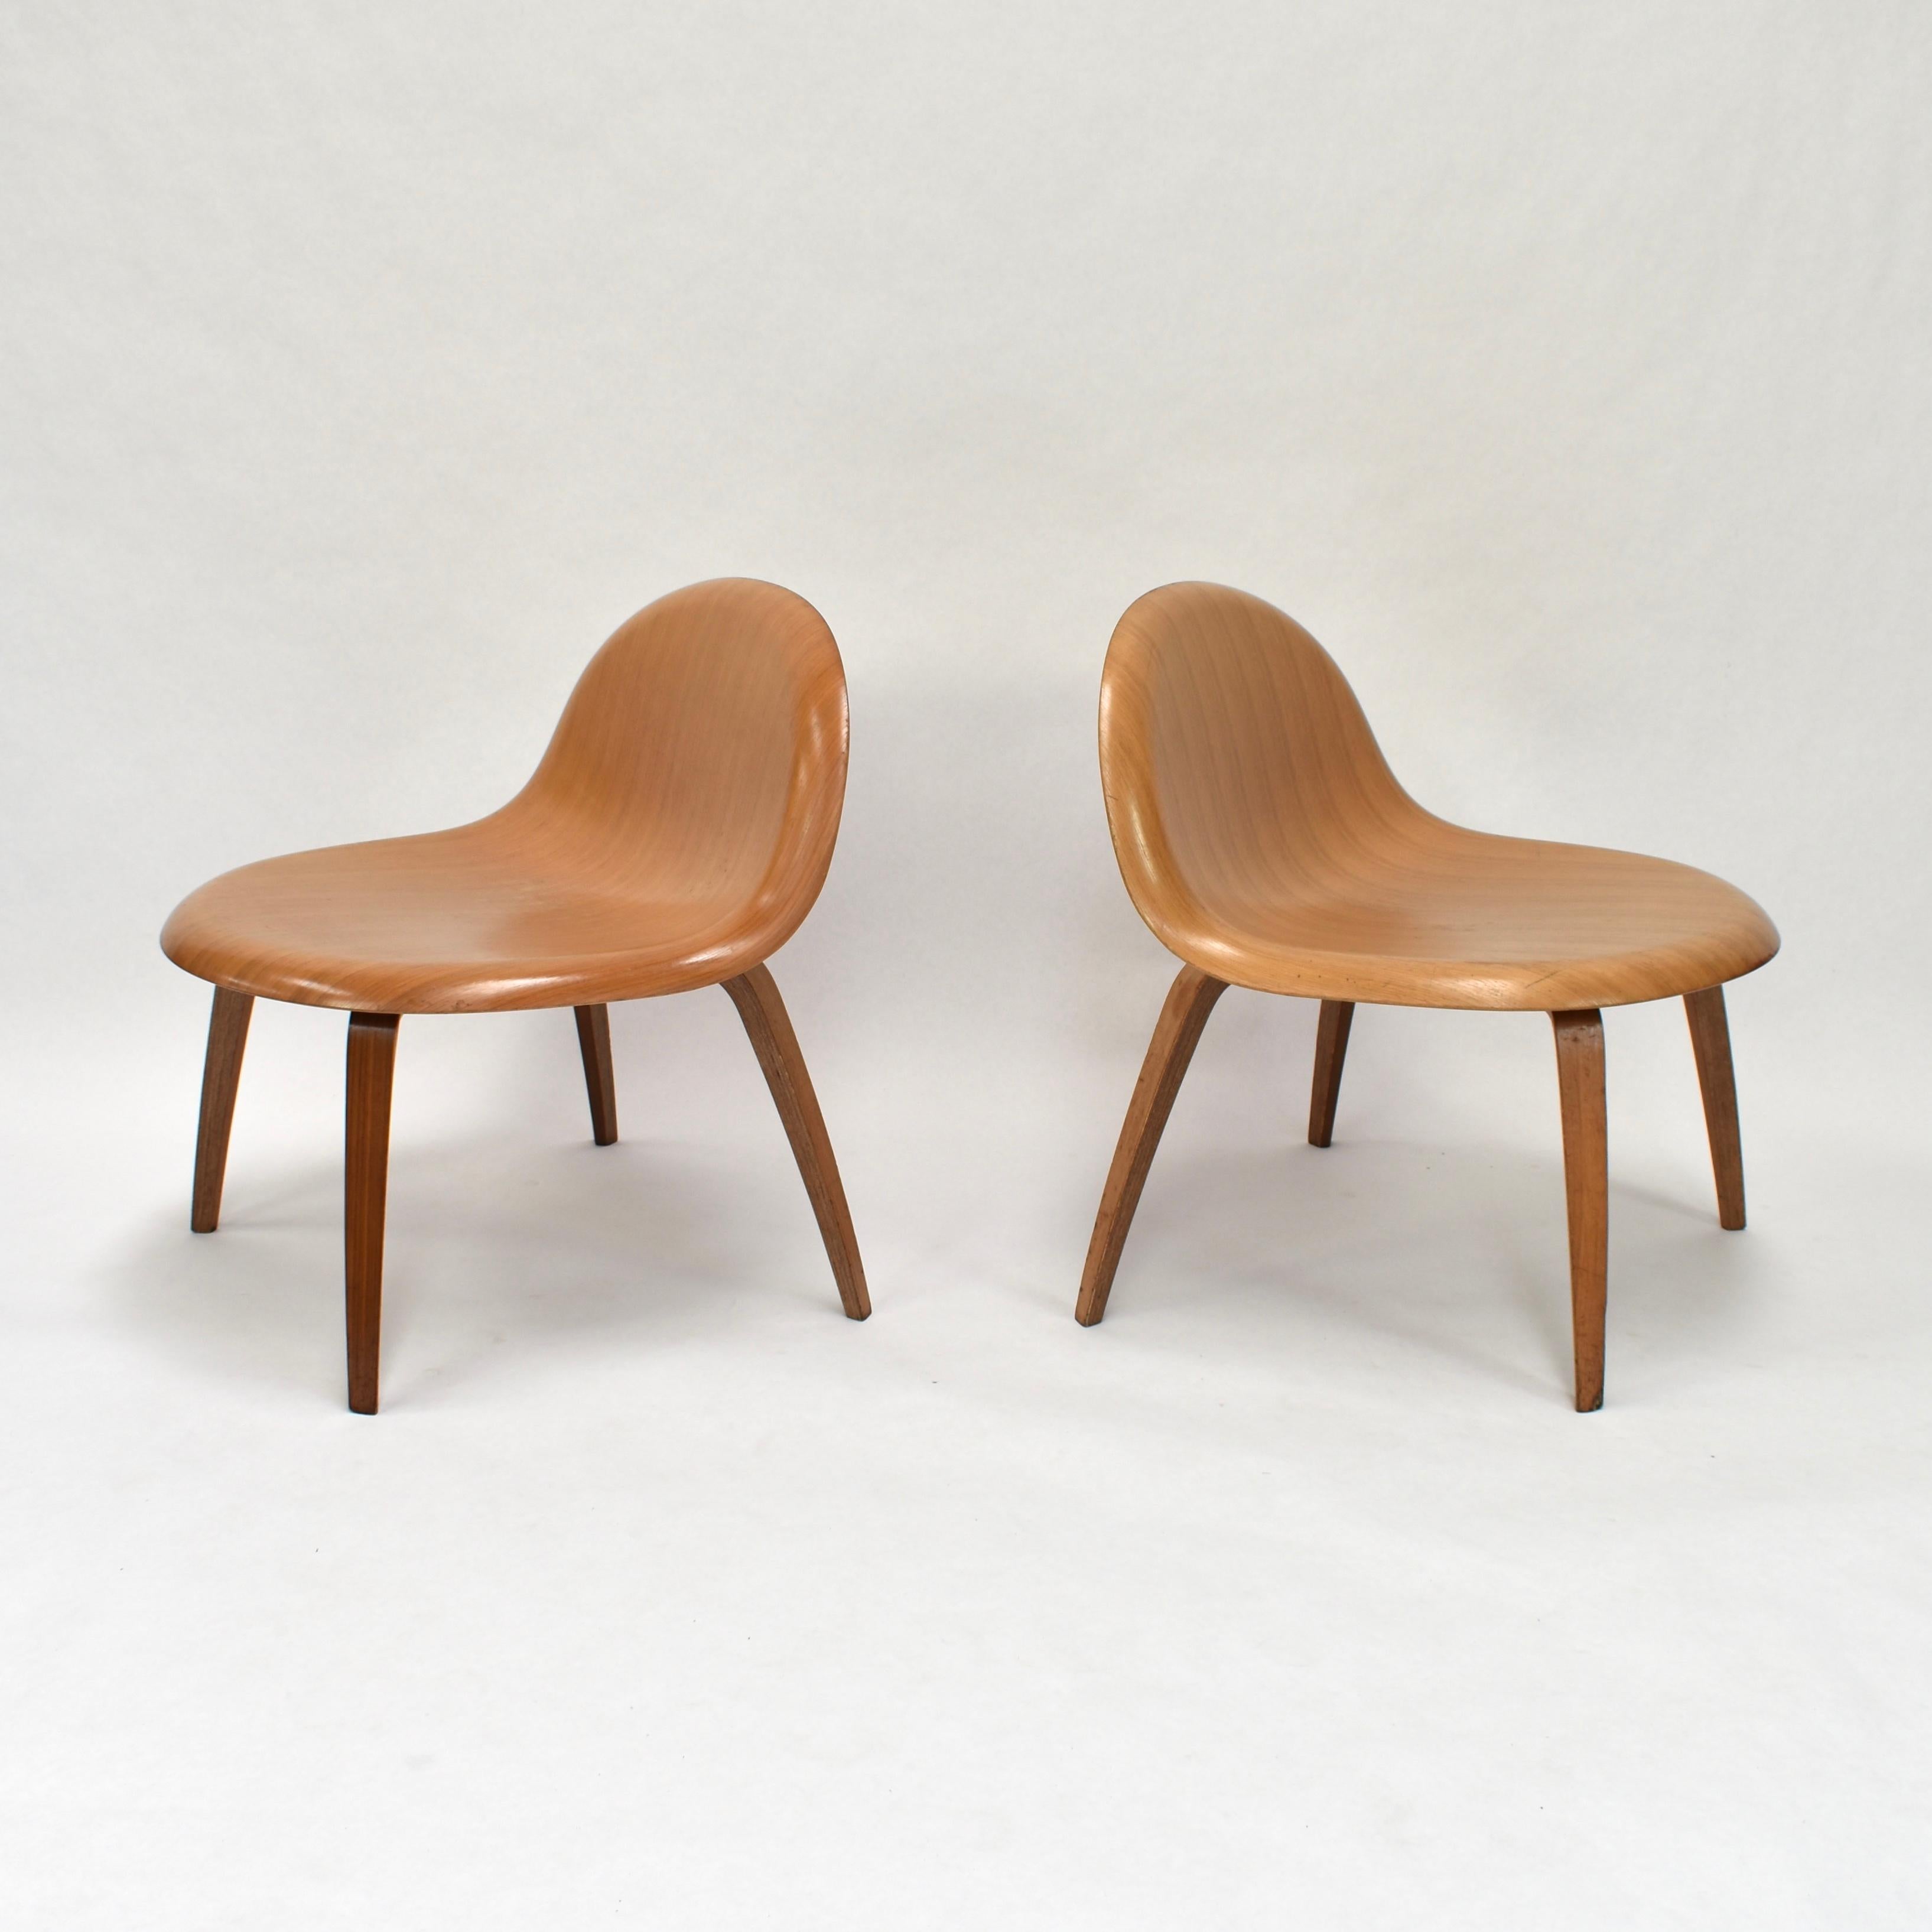 Late 20th Century Molded Plywood Lounge Chairs by Boris Berlin and Poul Christiansen for Komplot